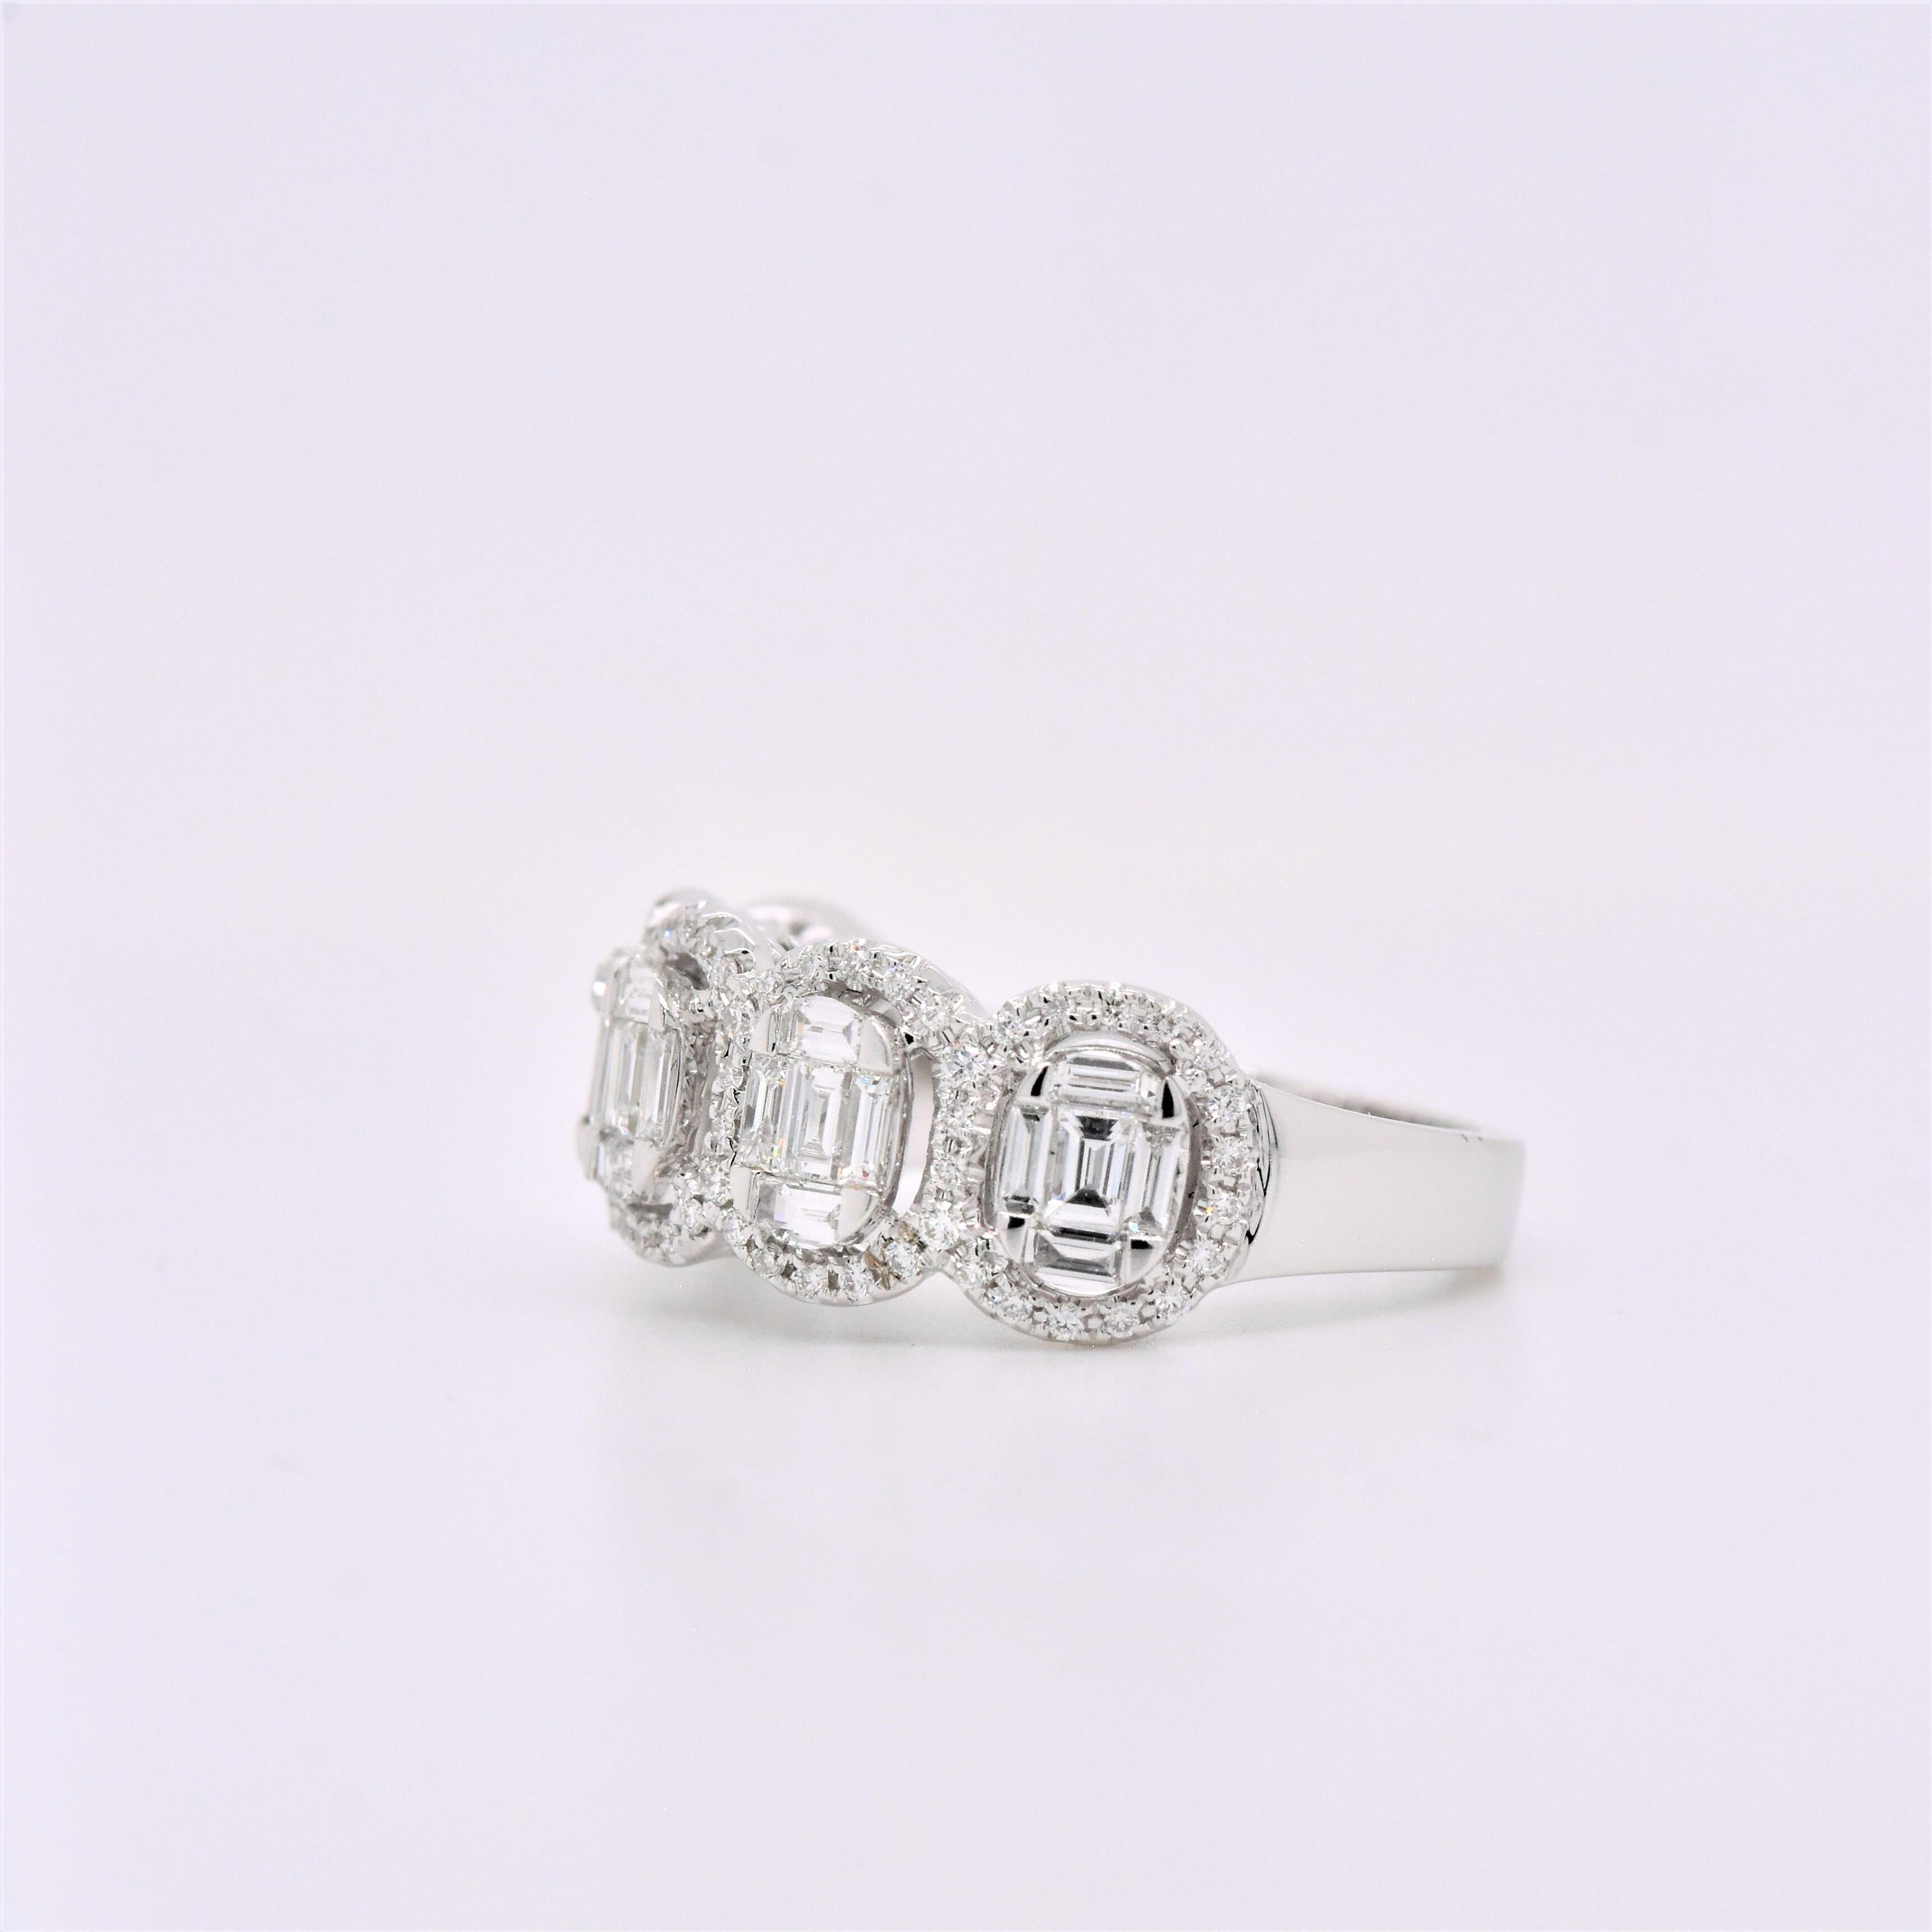 Take her breath away with this exceptional diamond ring. Beautifully crafted in cool 18K White Gold, this ring features five parts of five brilliant baguette-cut diamonds, each framed with round accent diamonds, and aligned in a clever stepped